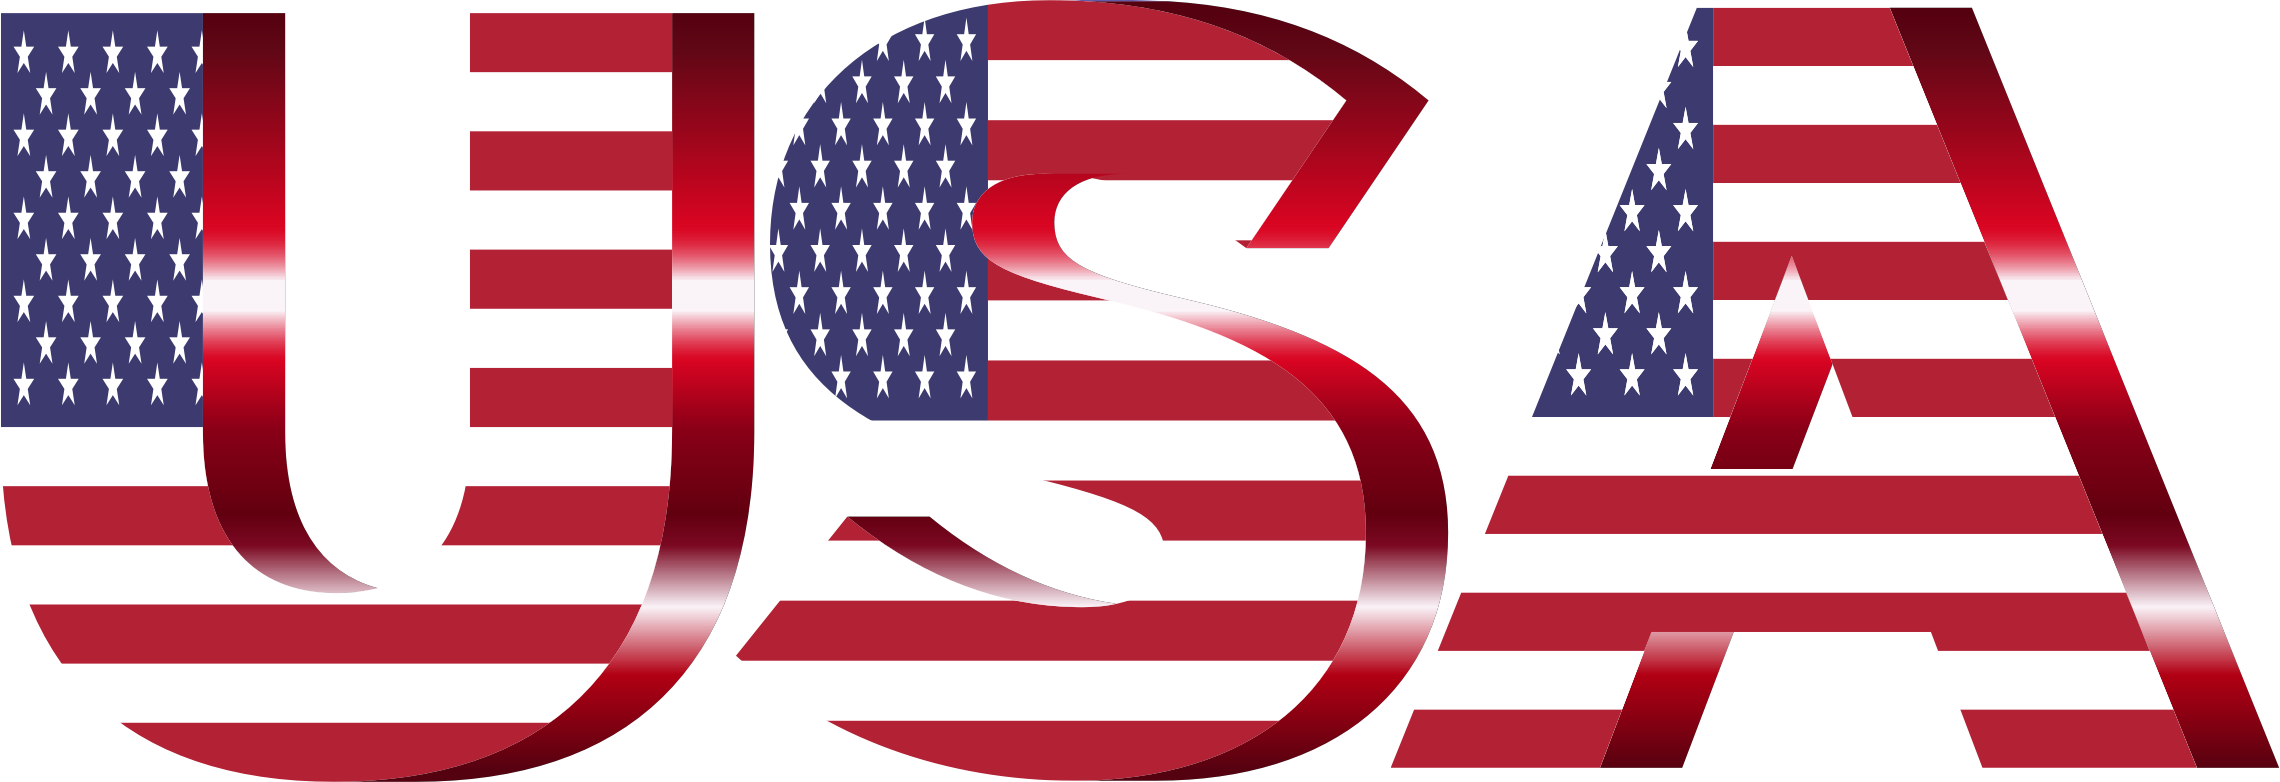 united states clipart cool